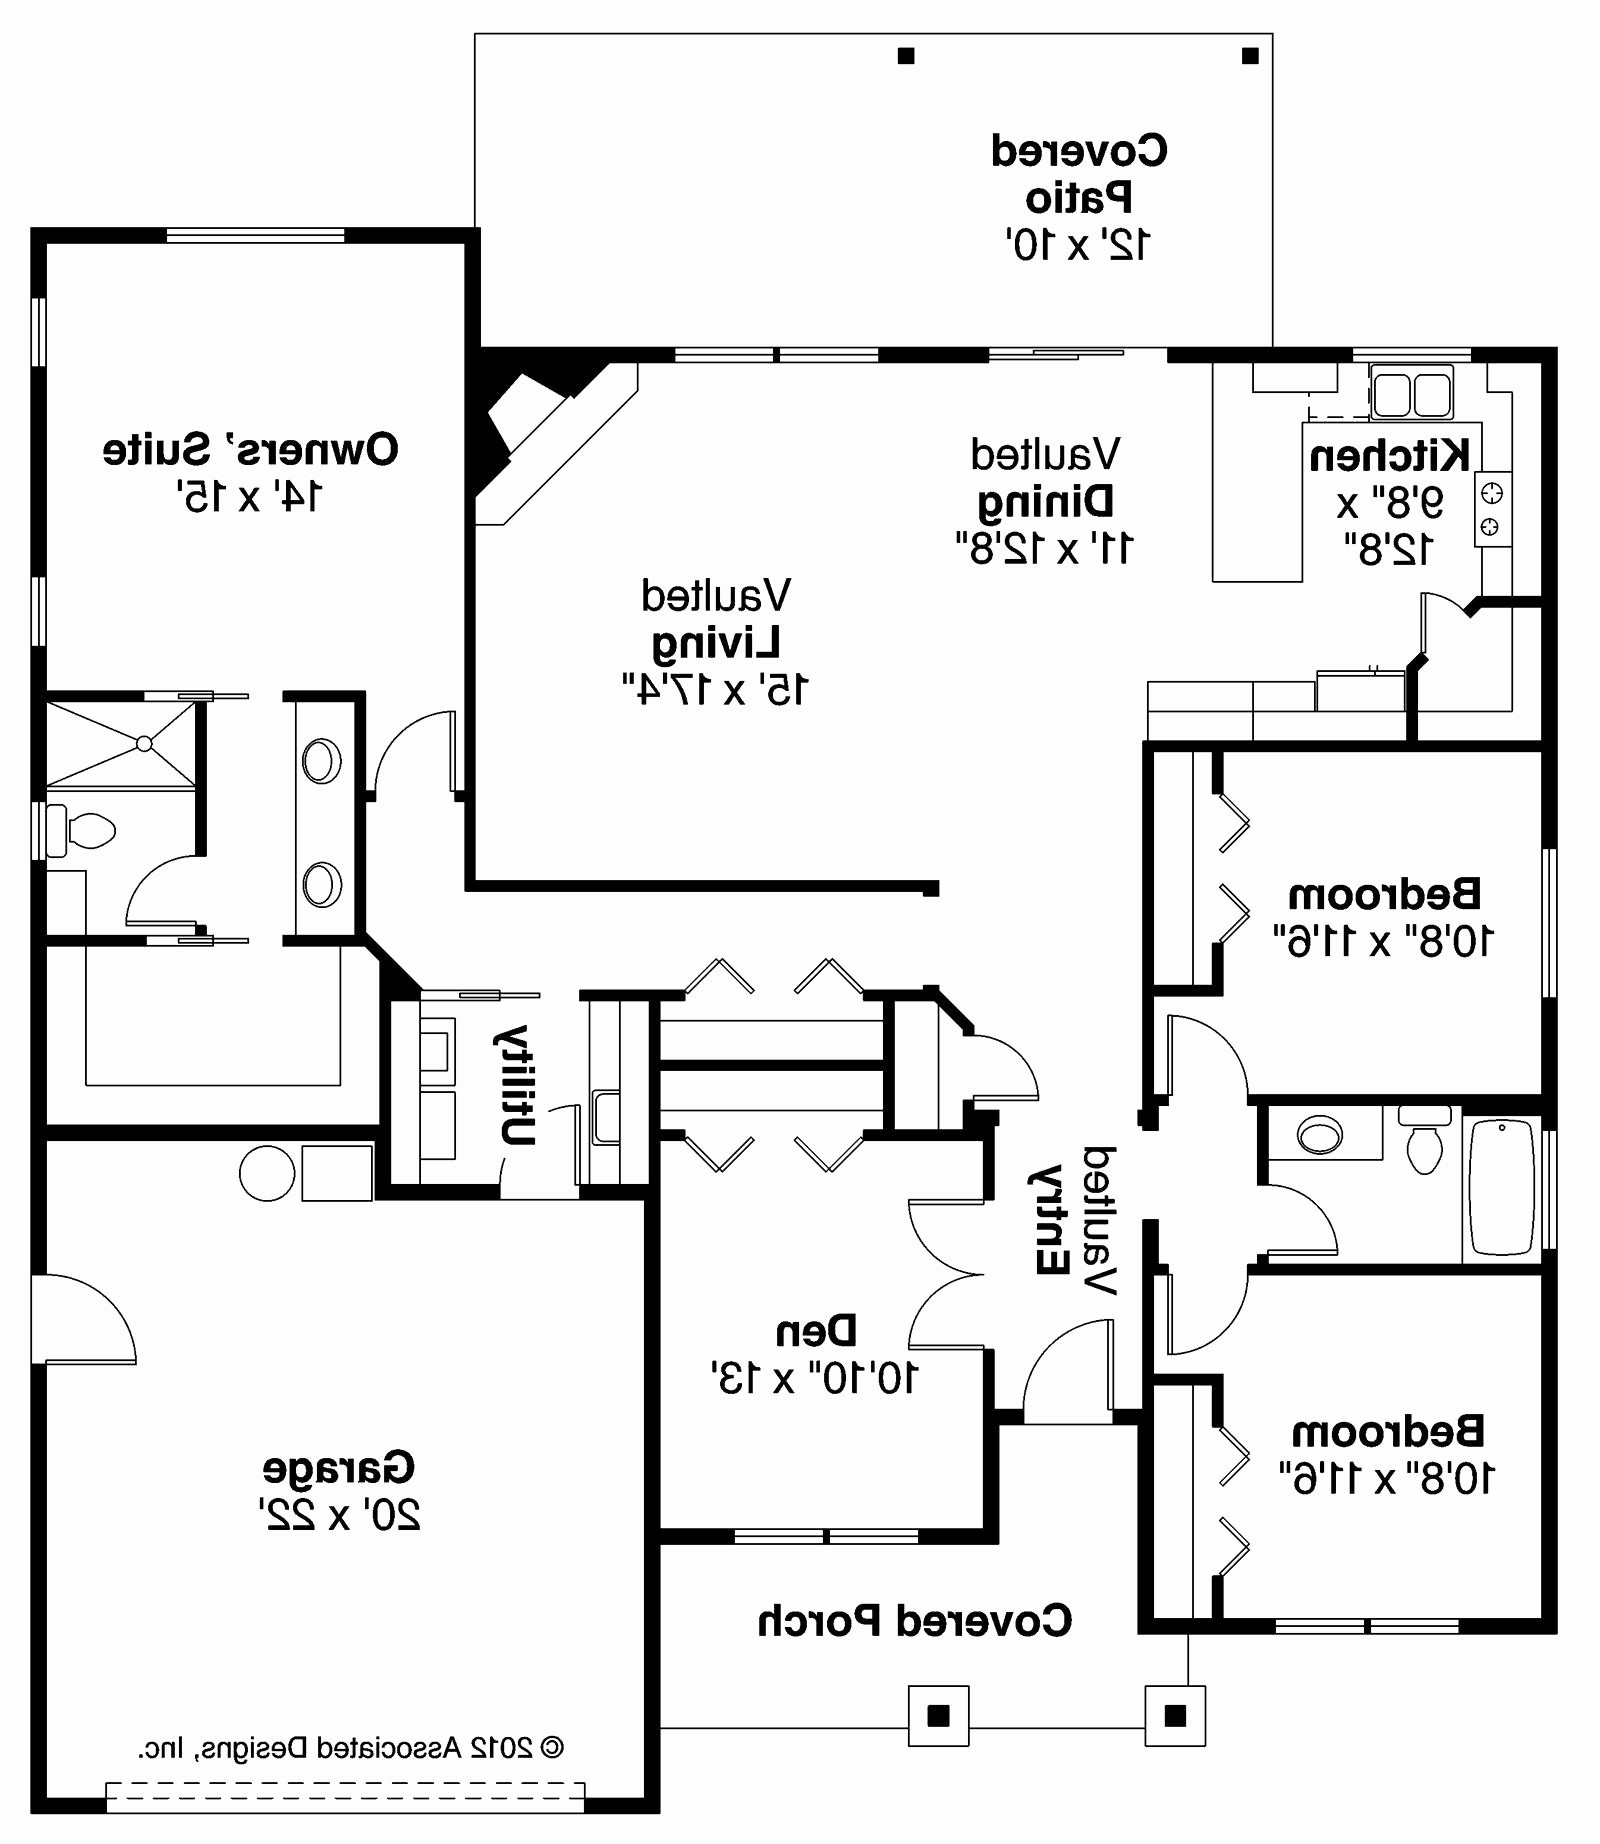 Home Electrical Wiring Diagrams House Wiring Diagram Electrical Floor Plan 2004 2010 Bmw X3 E83 3 0d Of Home Electrical Wiring Diagrams